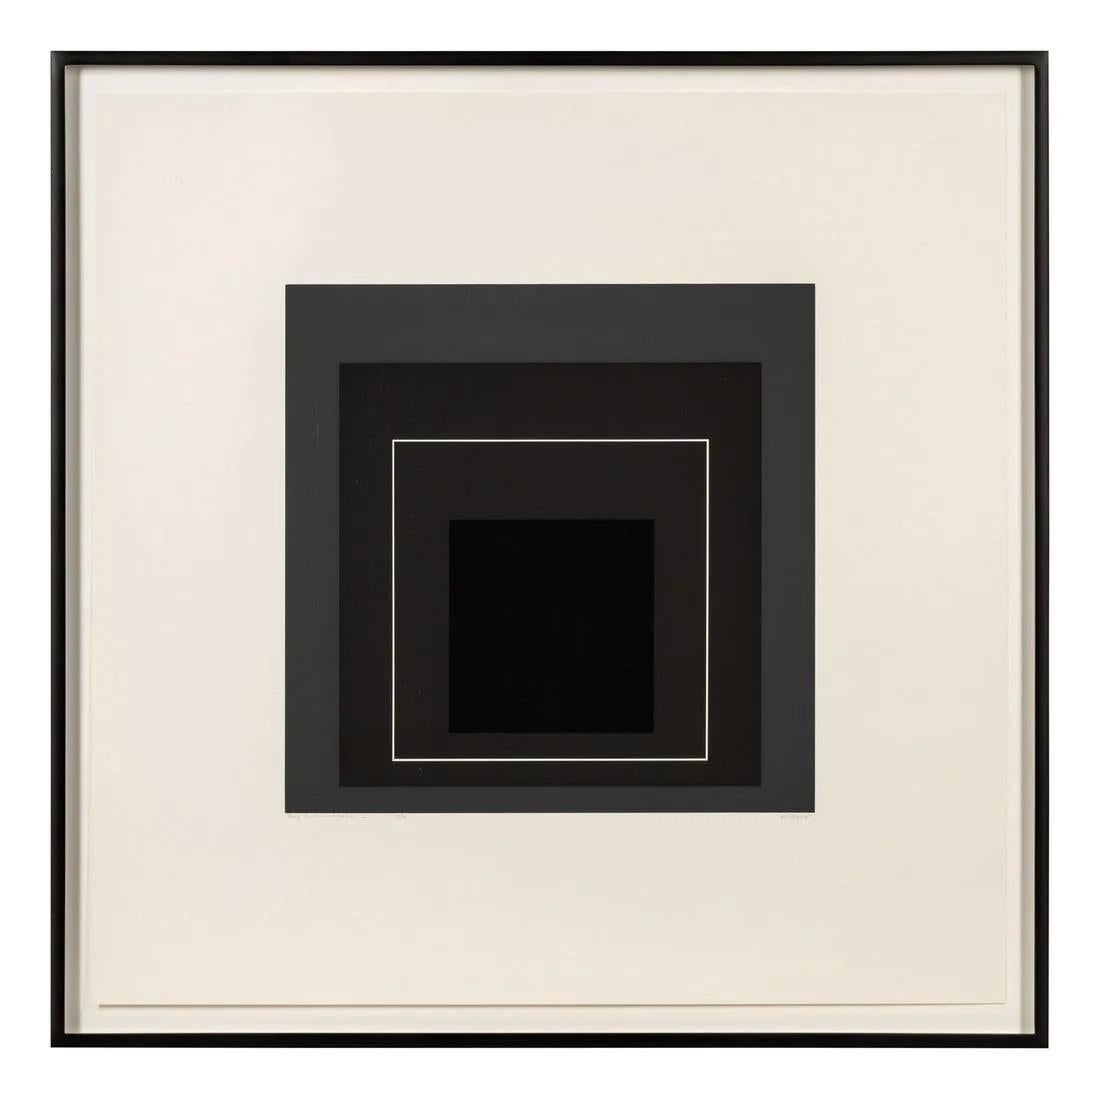 Josef Albers
(German/American, 1888-1976)
Gray Instrumentation I-L, 1974
color screenprint
signed, titled, and numbered in pencil
edition of 36
Framed: 20 3/4 x 20 3/4 inches
Sheet: 19 x 19 inches
Published by Tyler Graphics Ltd., Bedford, New